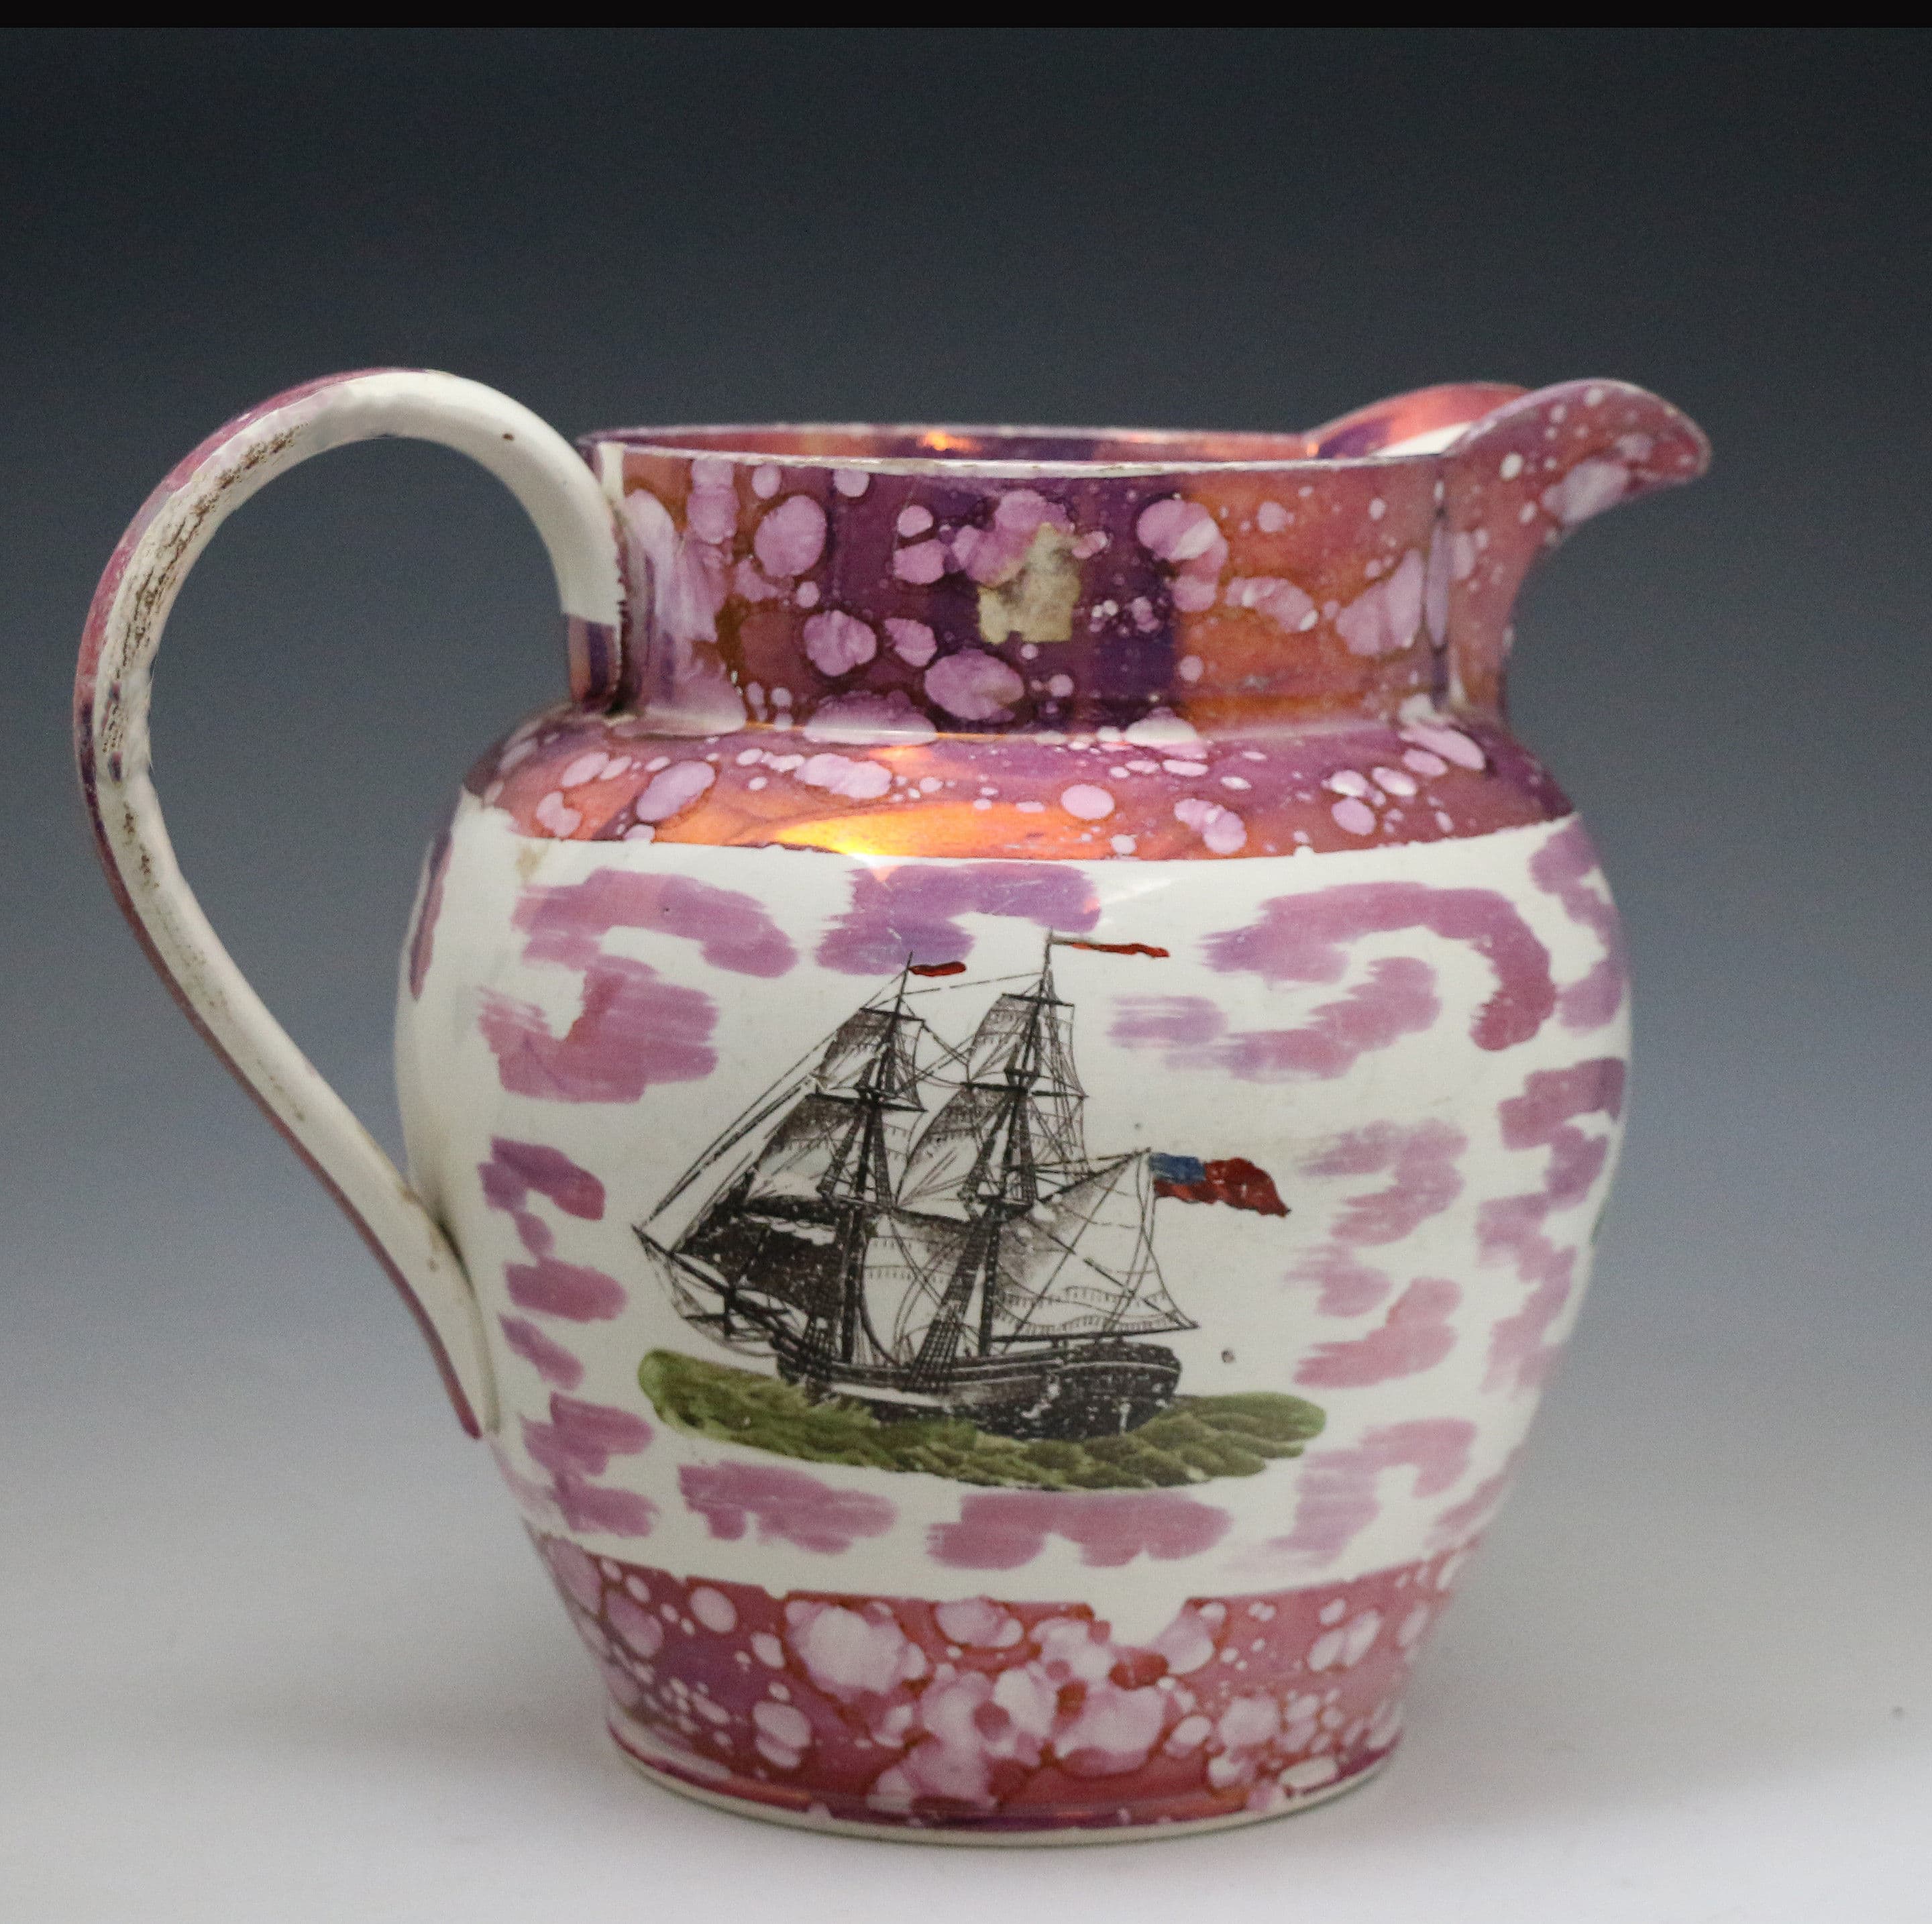 antique-english-pottery-pink-lustre-jug-with-nautical-themes-early